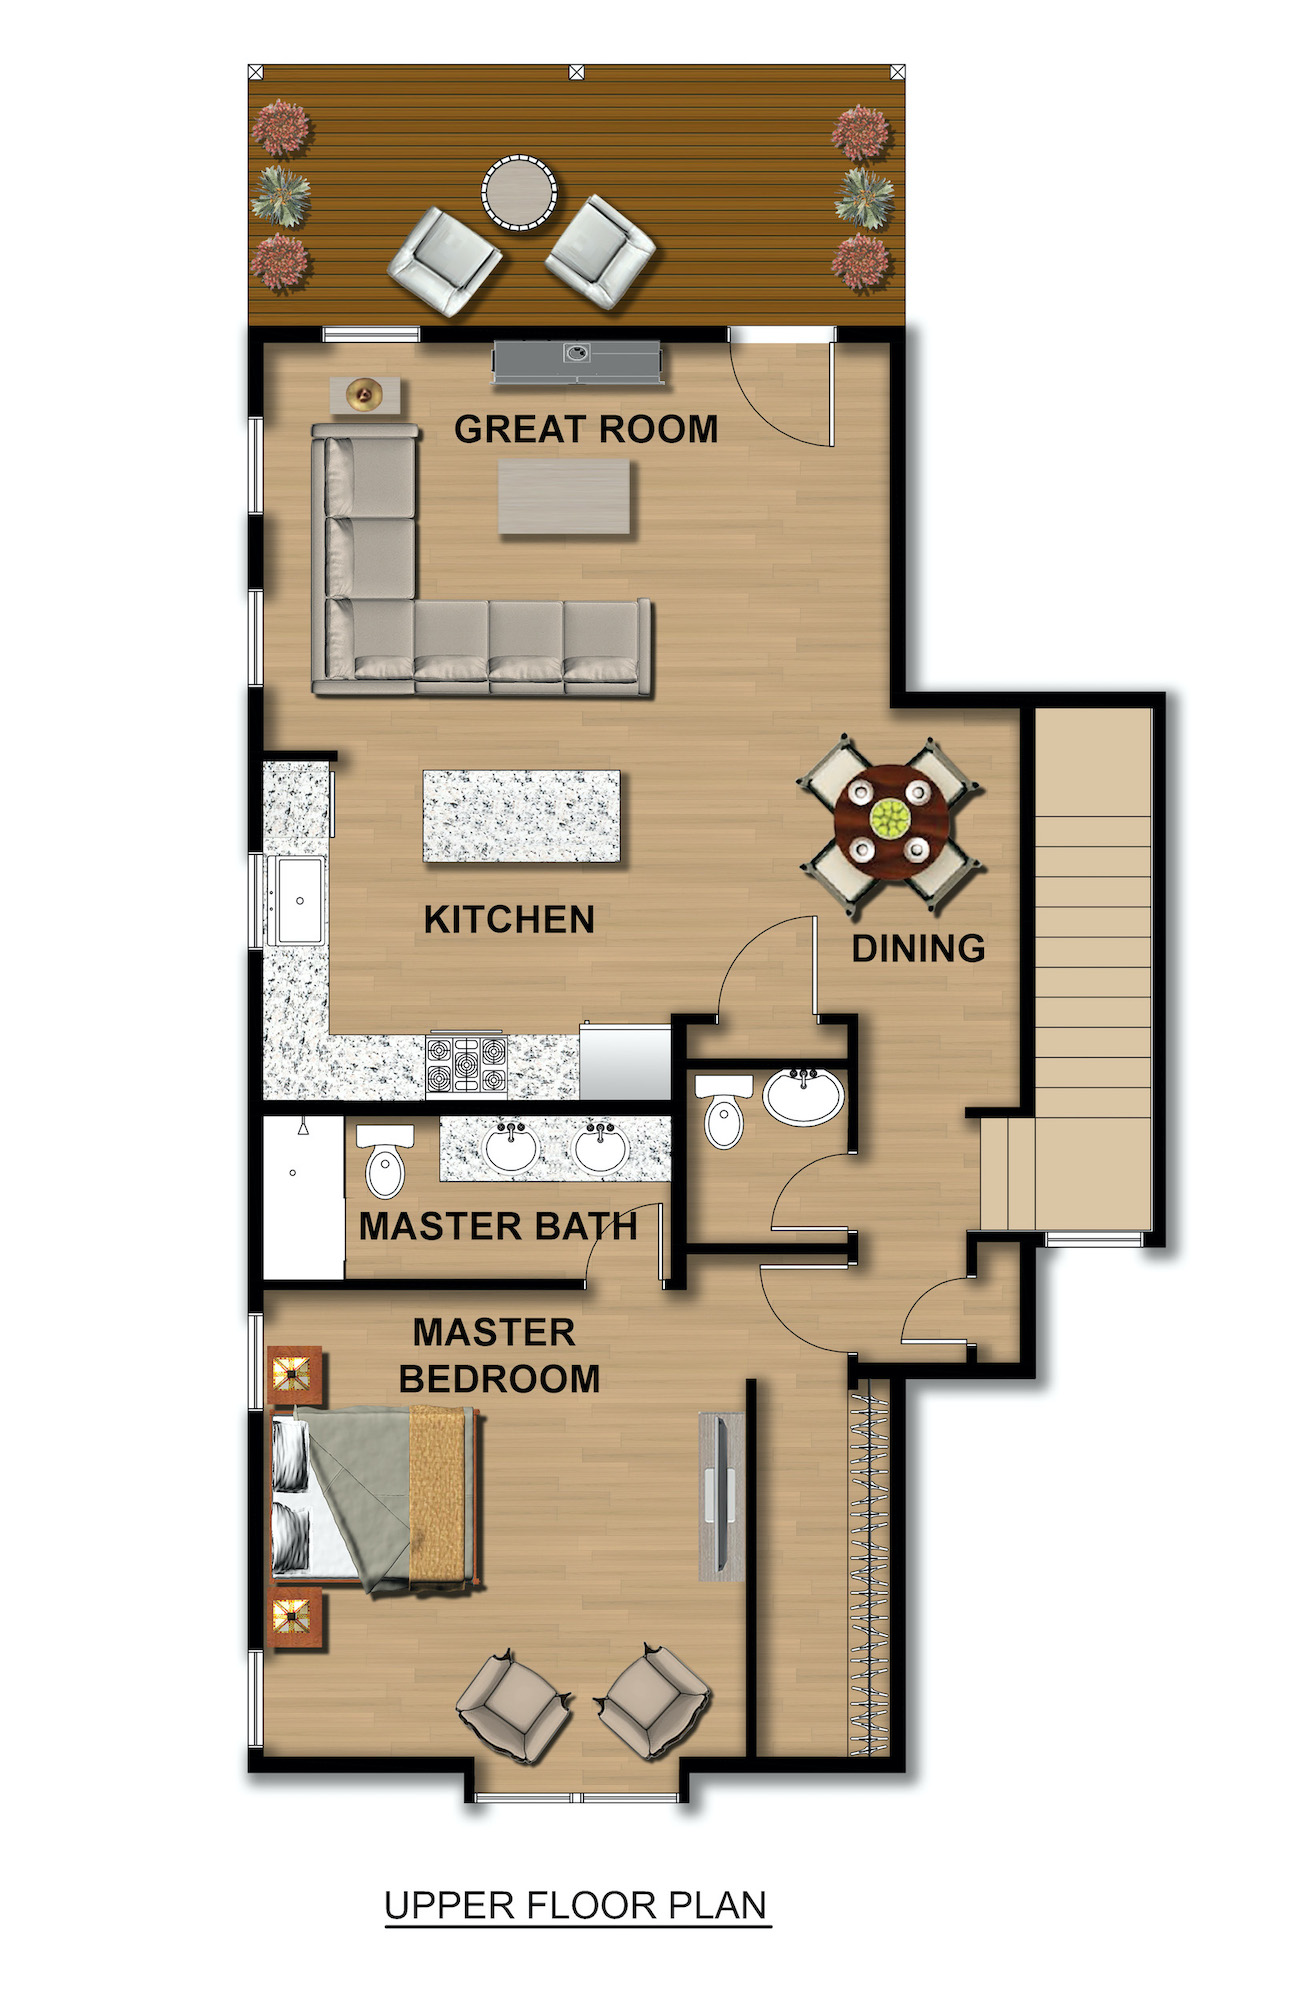 Upstairs floorplan of Spruce Haven townhomes